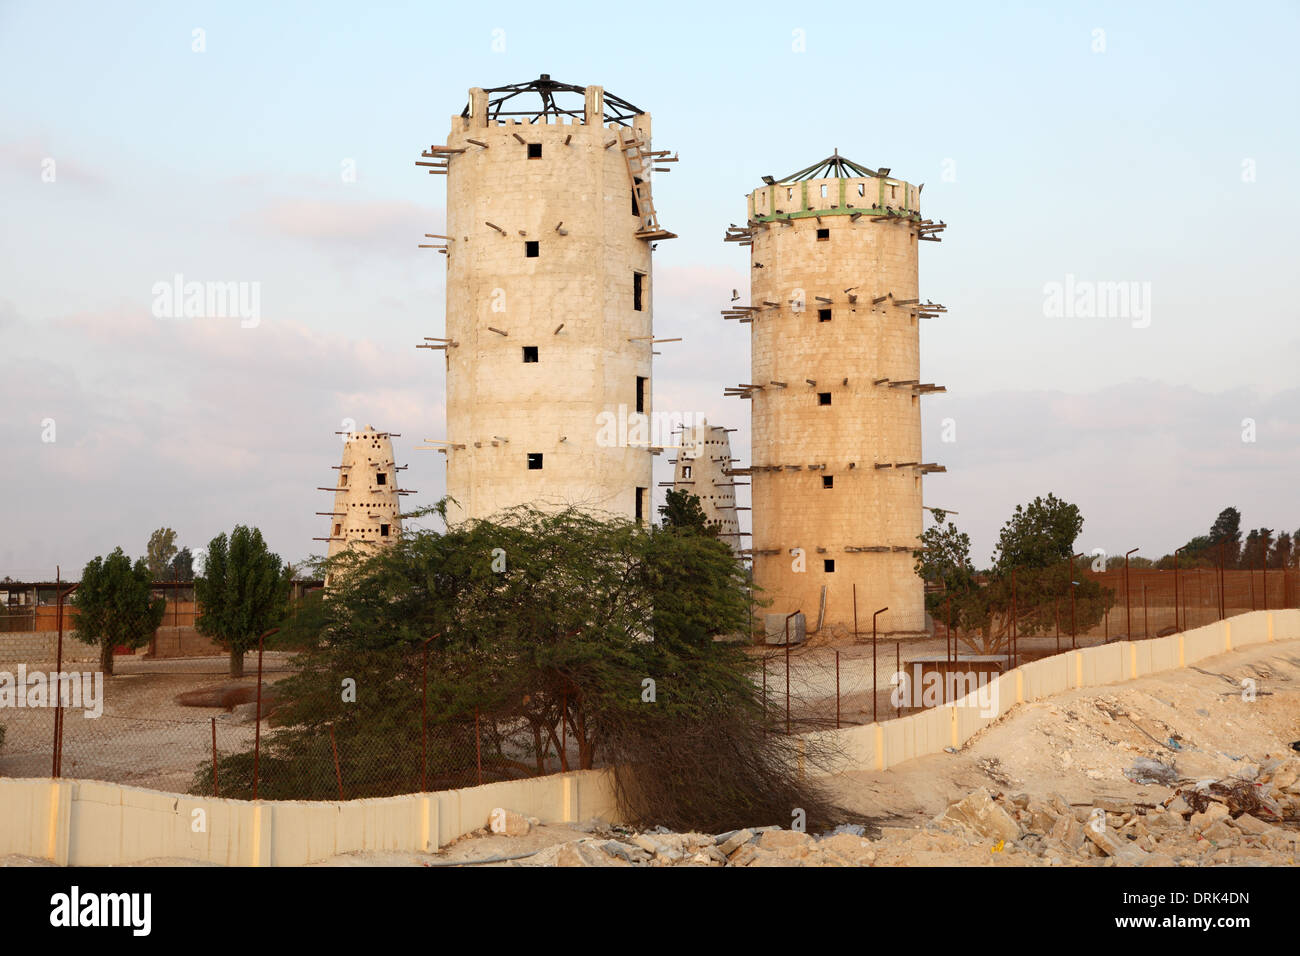 Pigeon towers in Qatar, Middle East Stock Photo